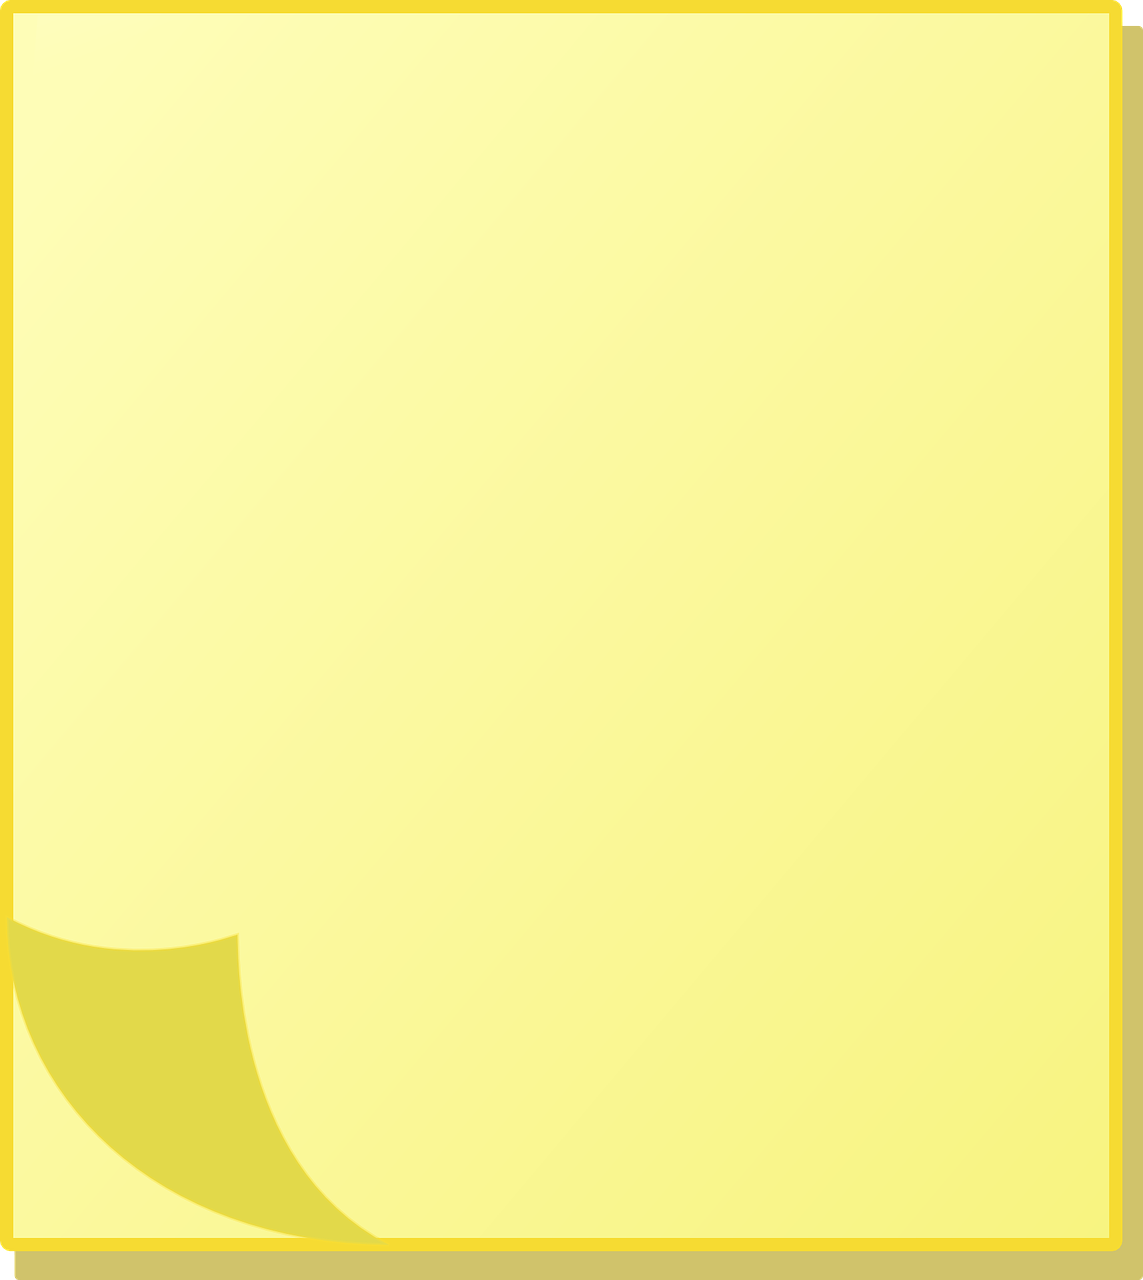 sticky note note memo free photo